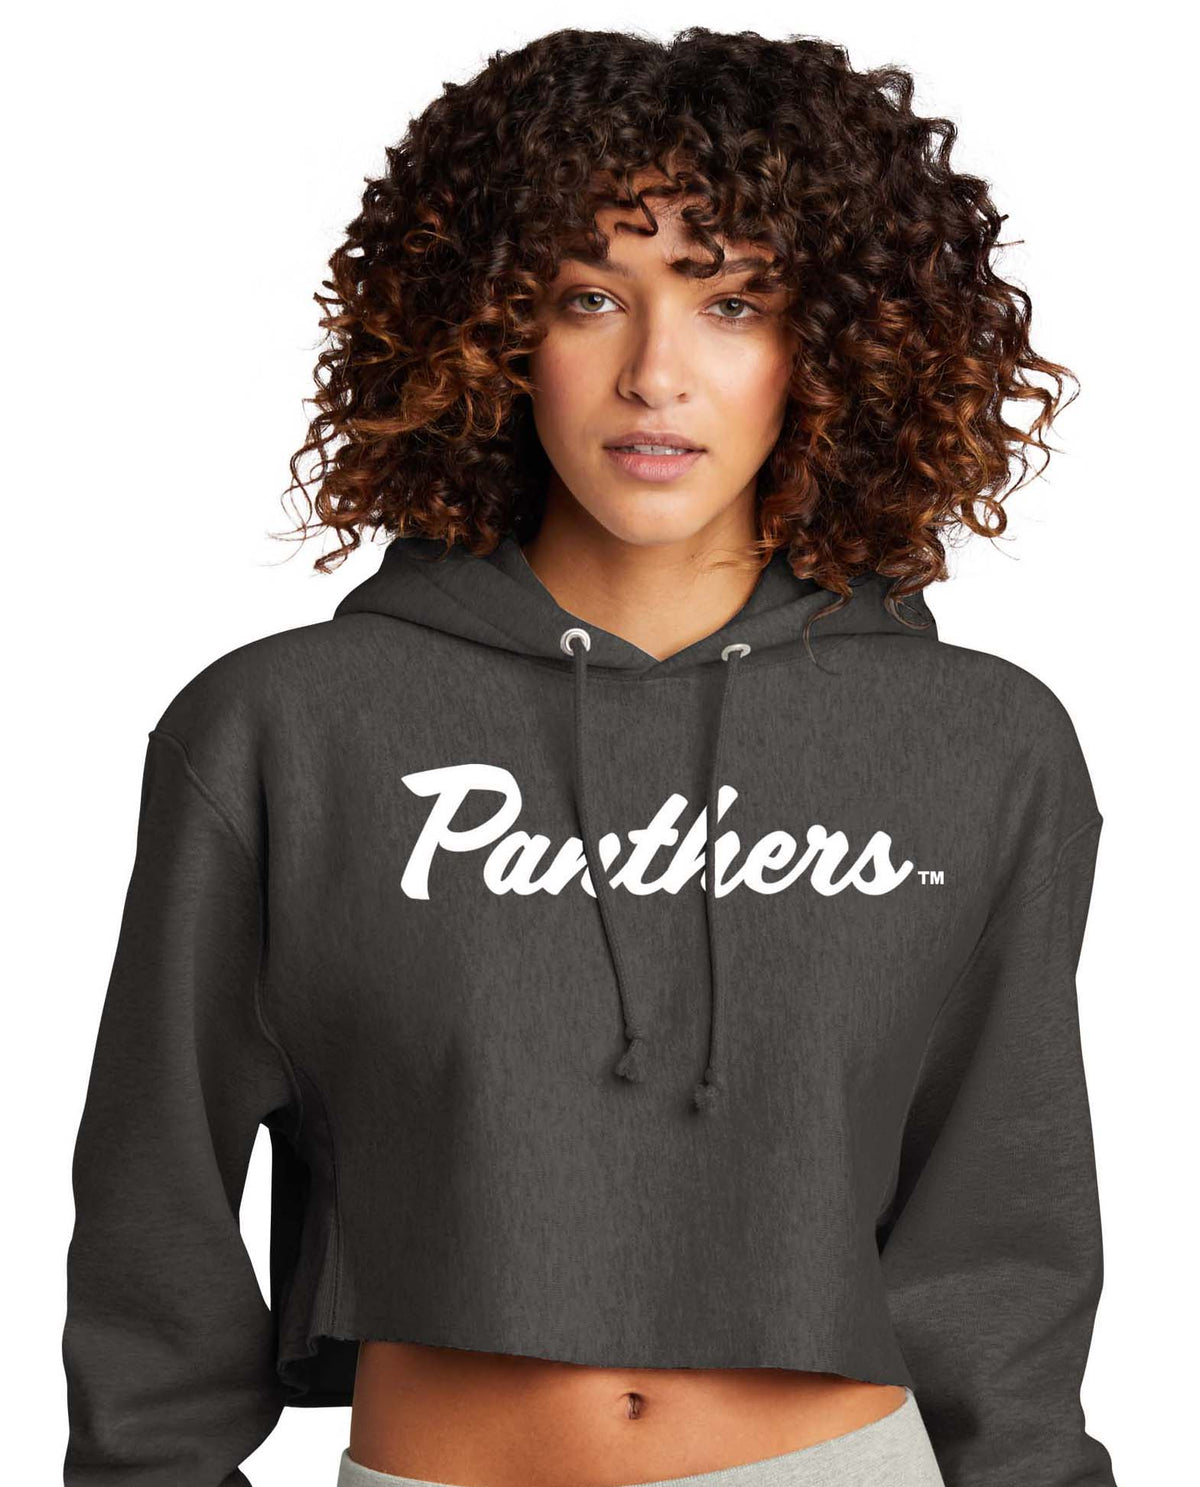 Panthers Women’s Reverse Weave Cropped Cut-Off Hooded Sweatshirt- Charcoal